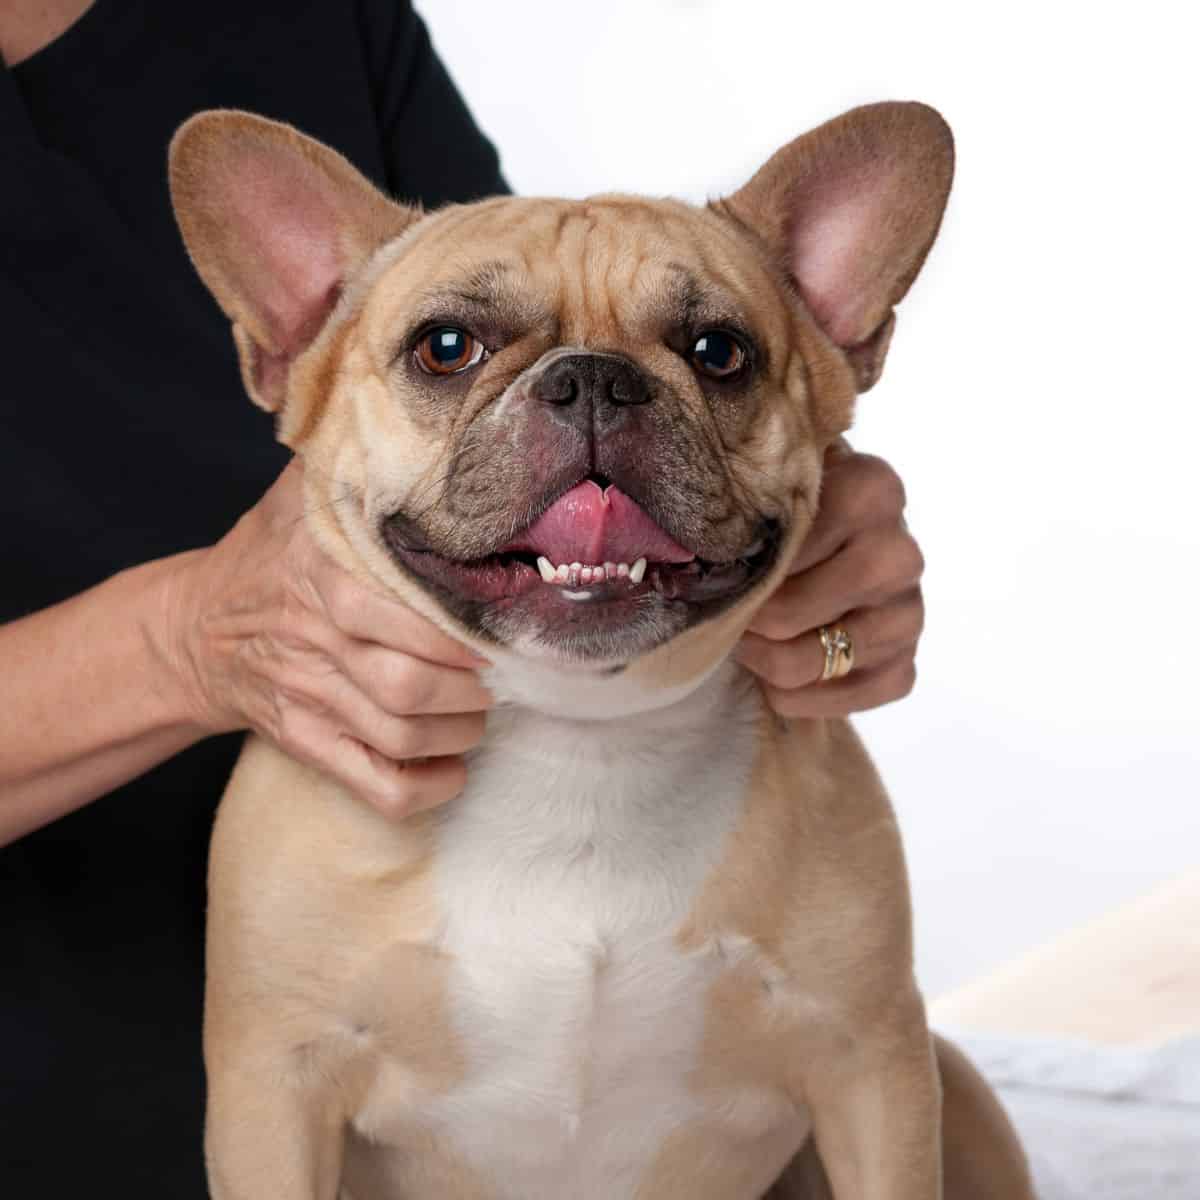 Fawn pug dog with tongue out getting a massage with two hands around his neck.